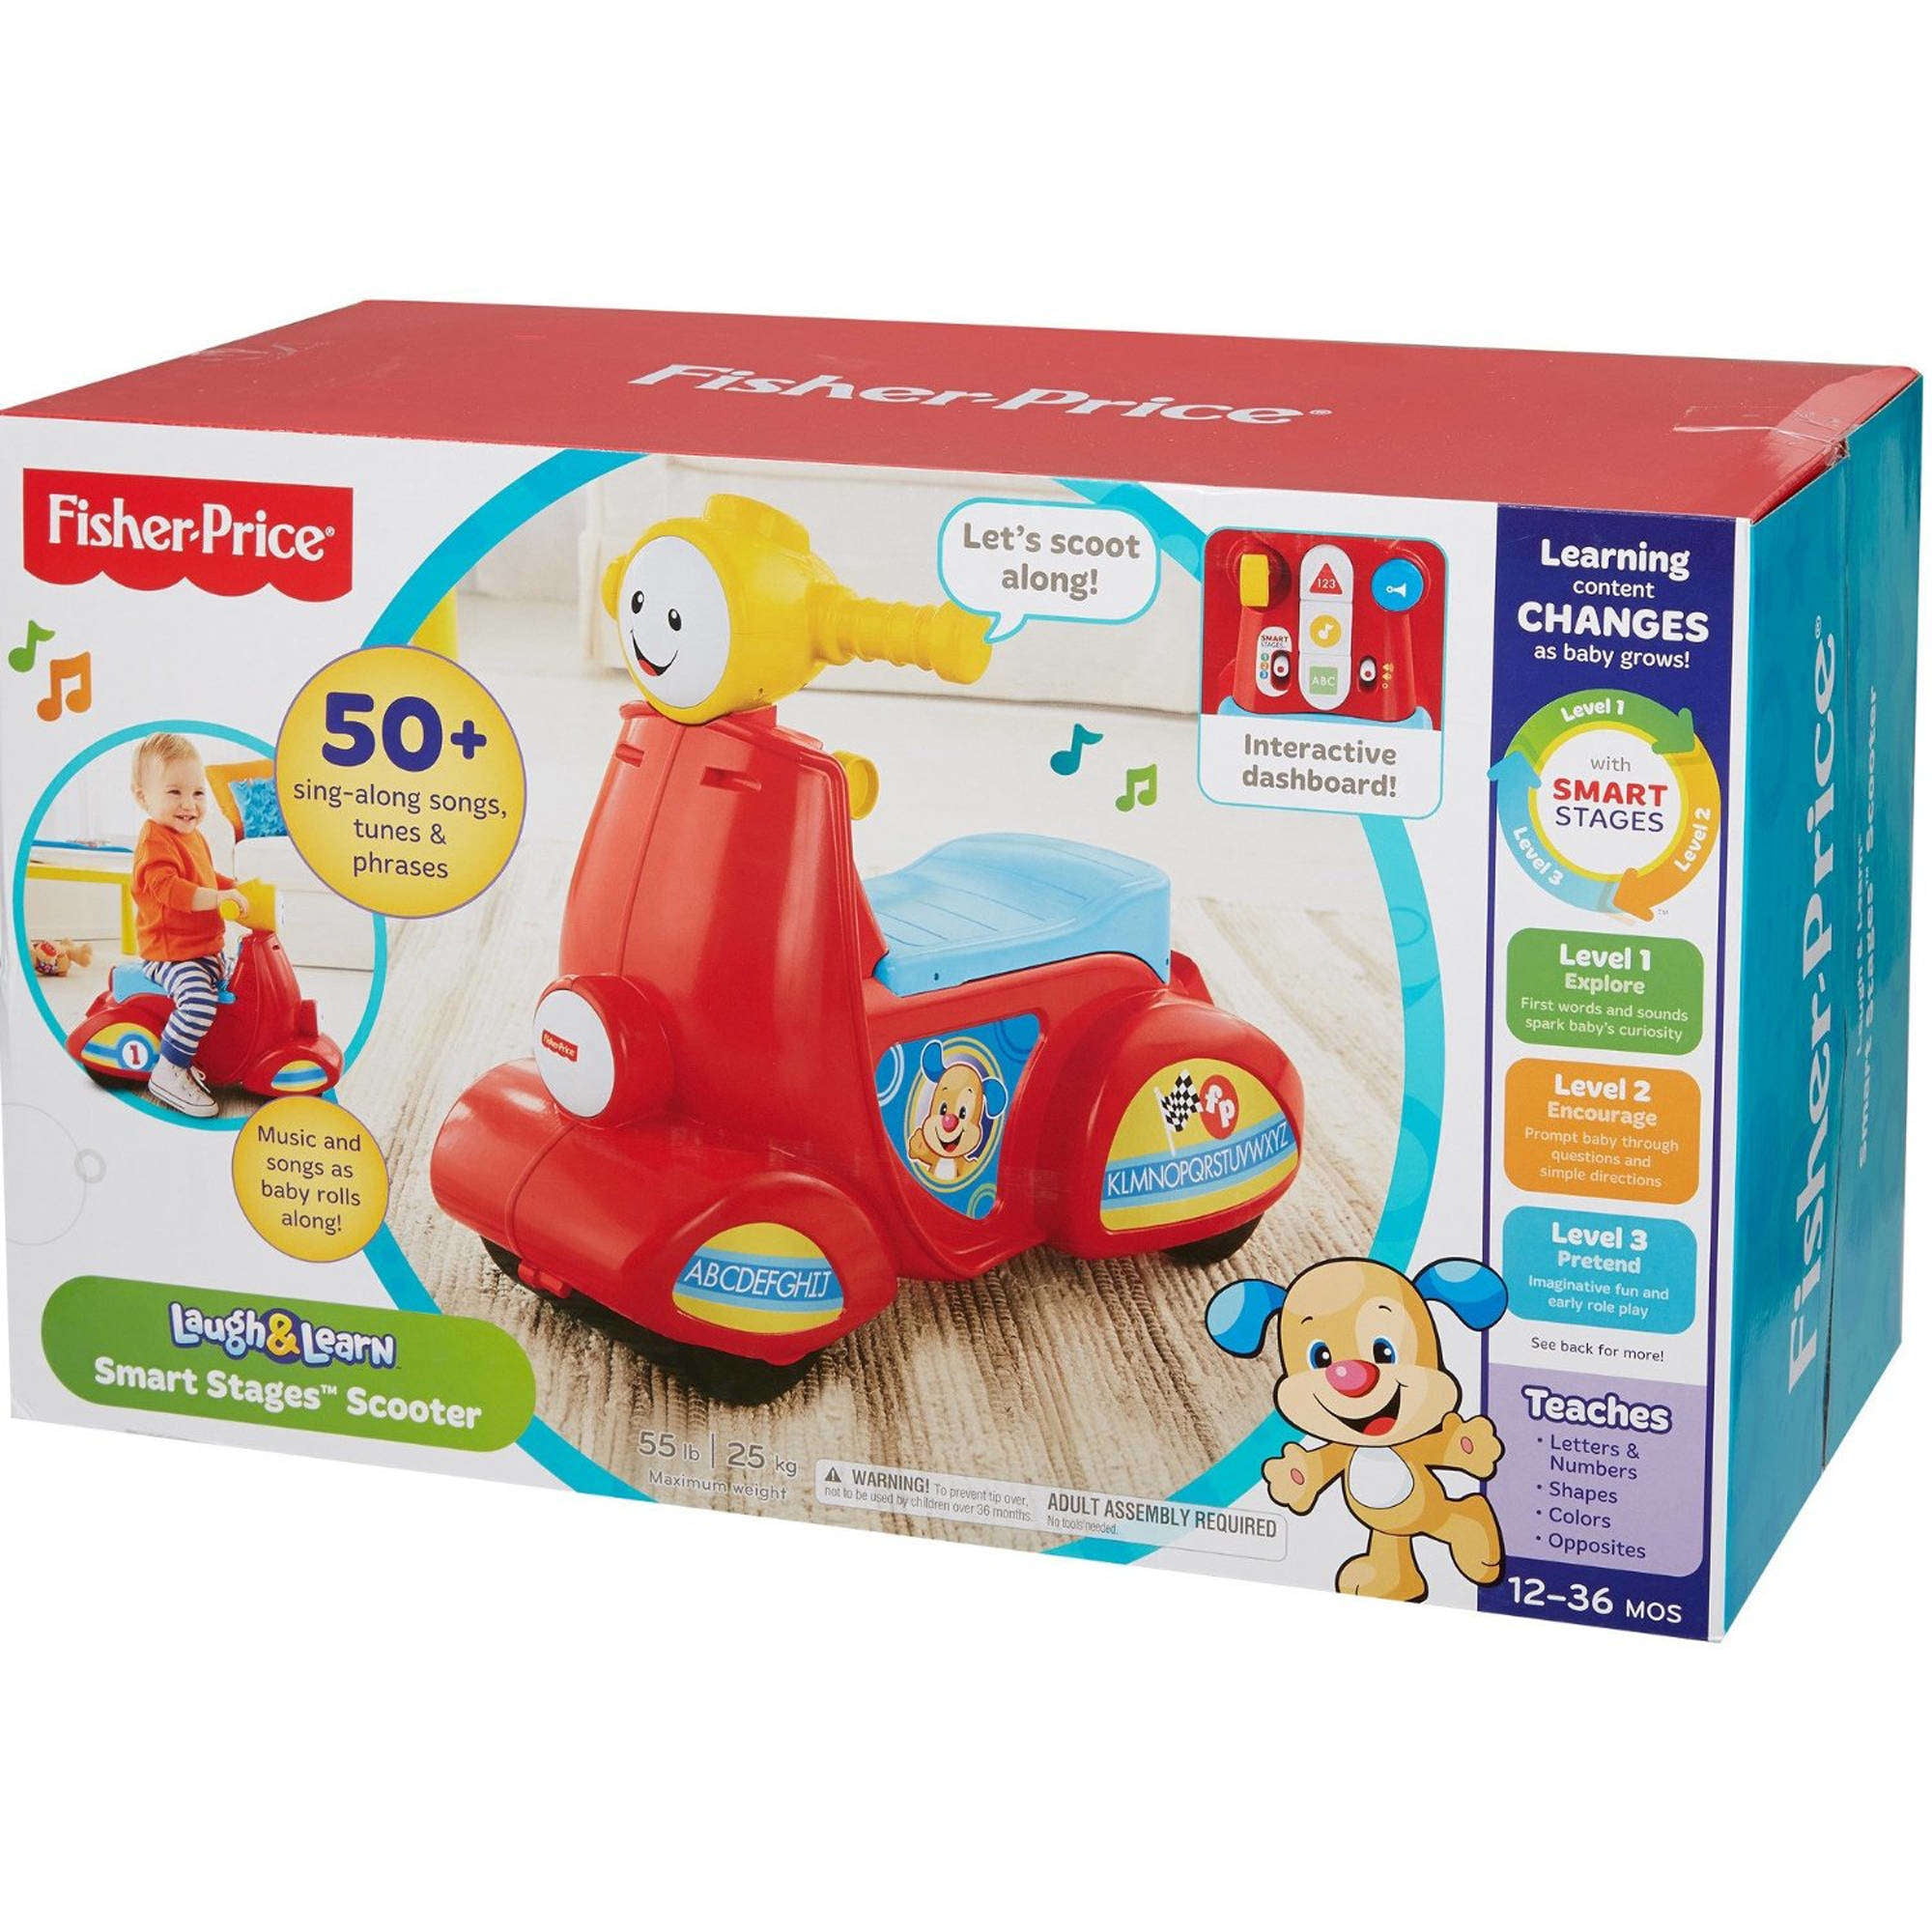 fritaget kollidere overvåge Laugh & Learn Smart Stages Scooter Ride-On Toddler Toy - Walmart.com